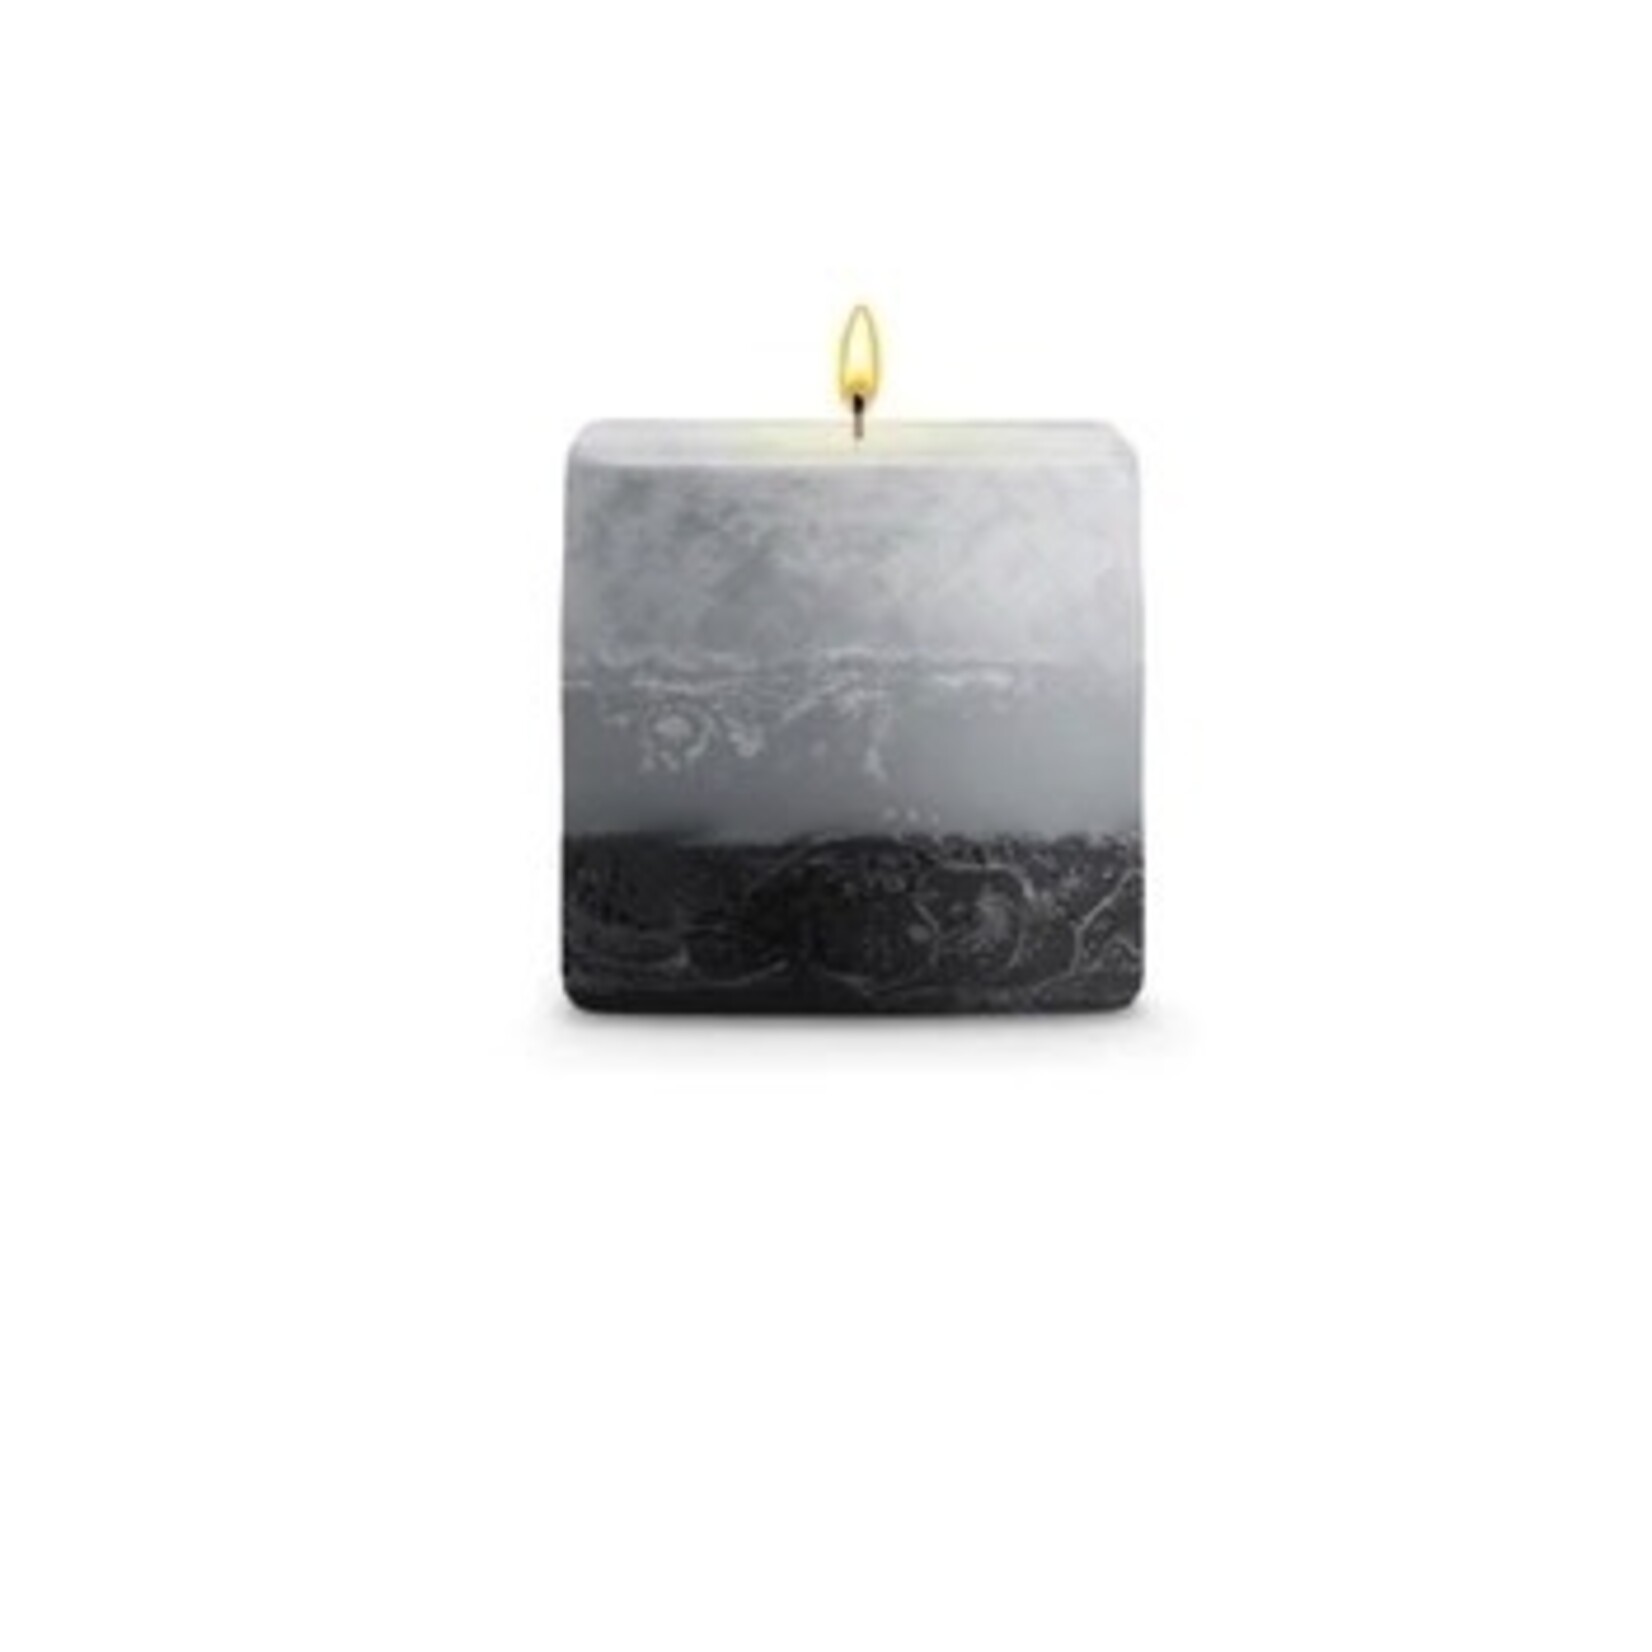 STONE CANDLES Stone Pillar Candle 3X3 SQ L'HOMME